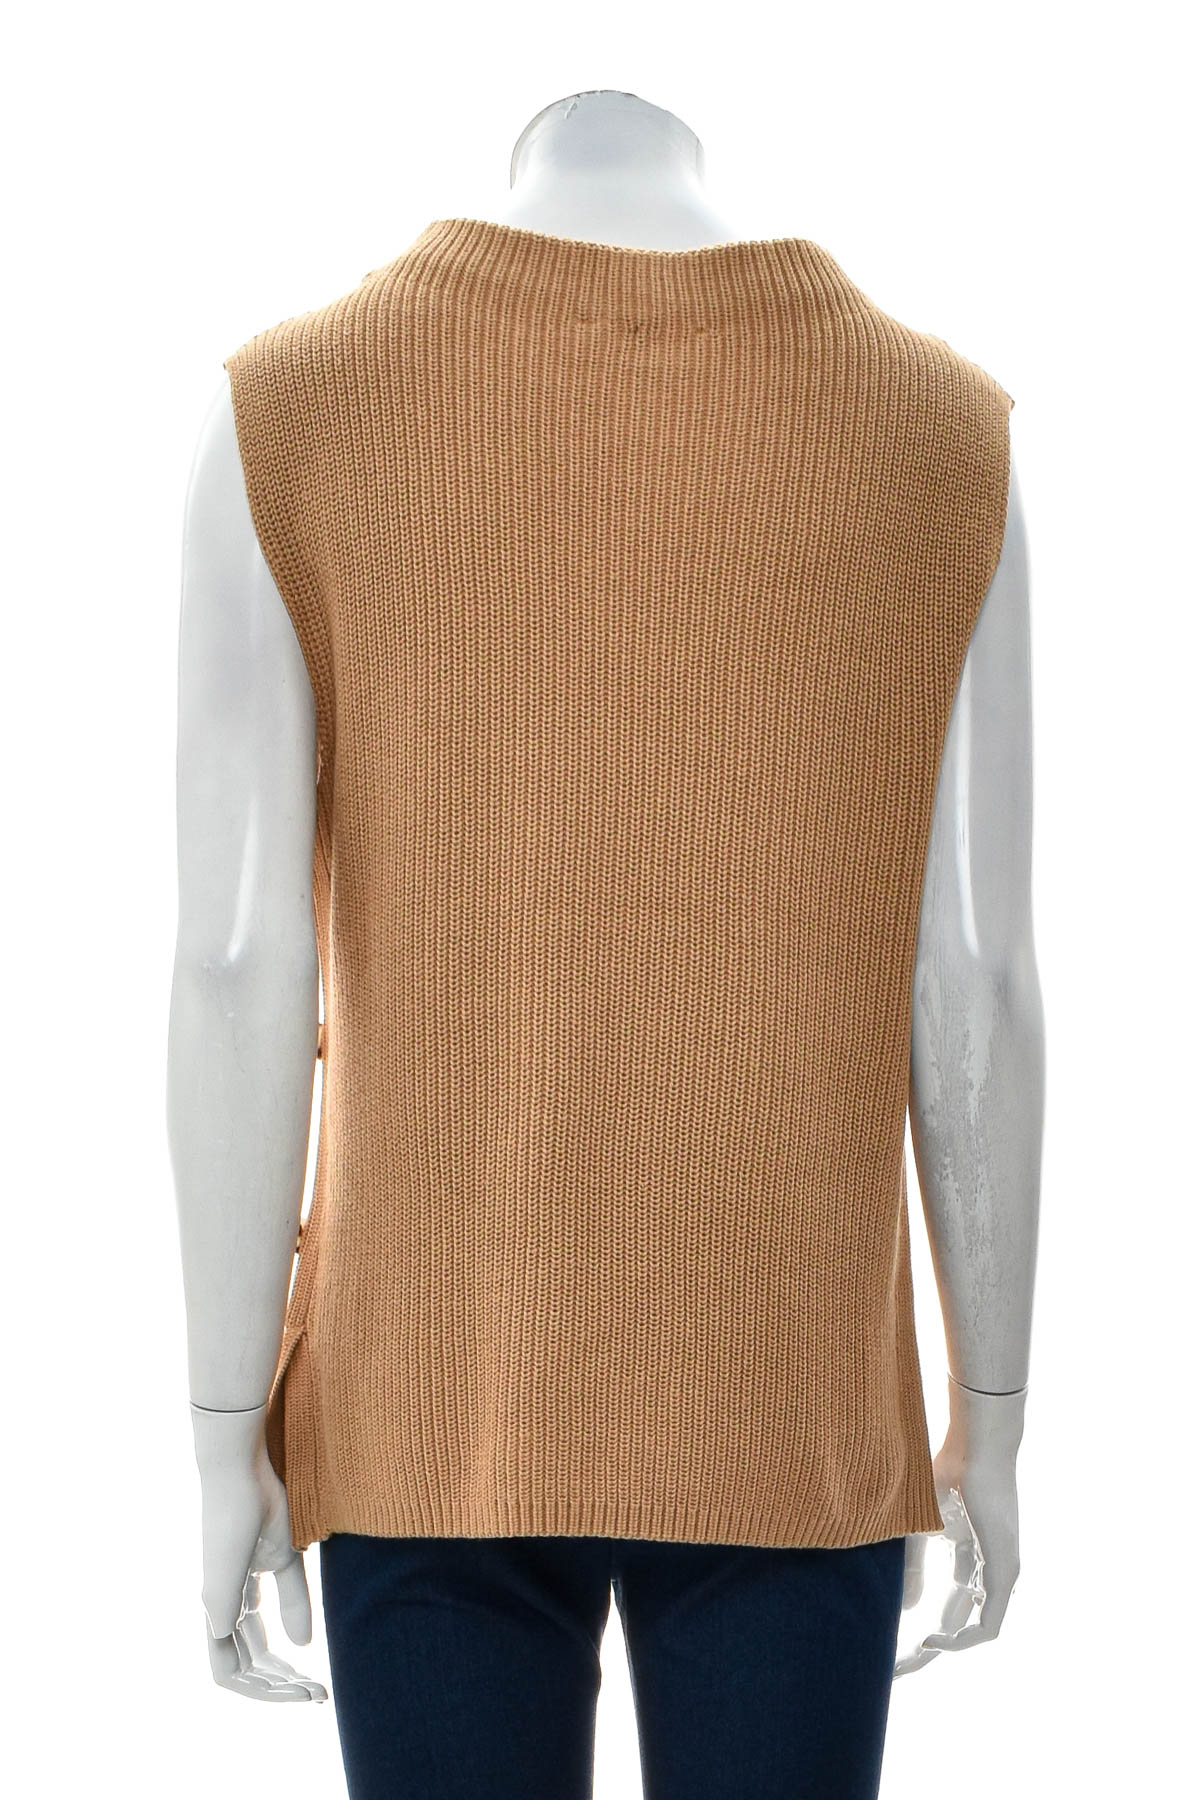 Women's sweater - Collection L - 1